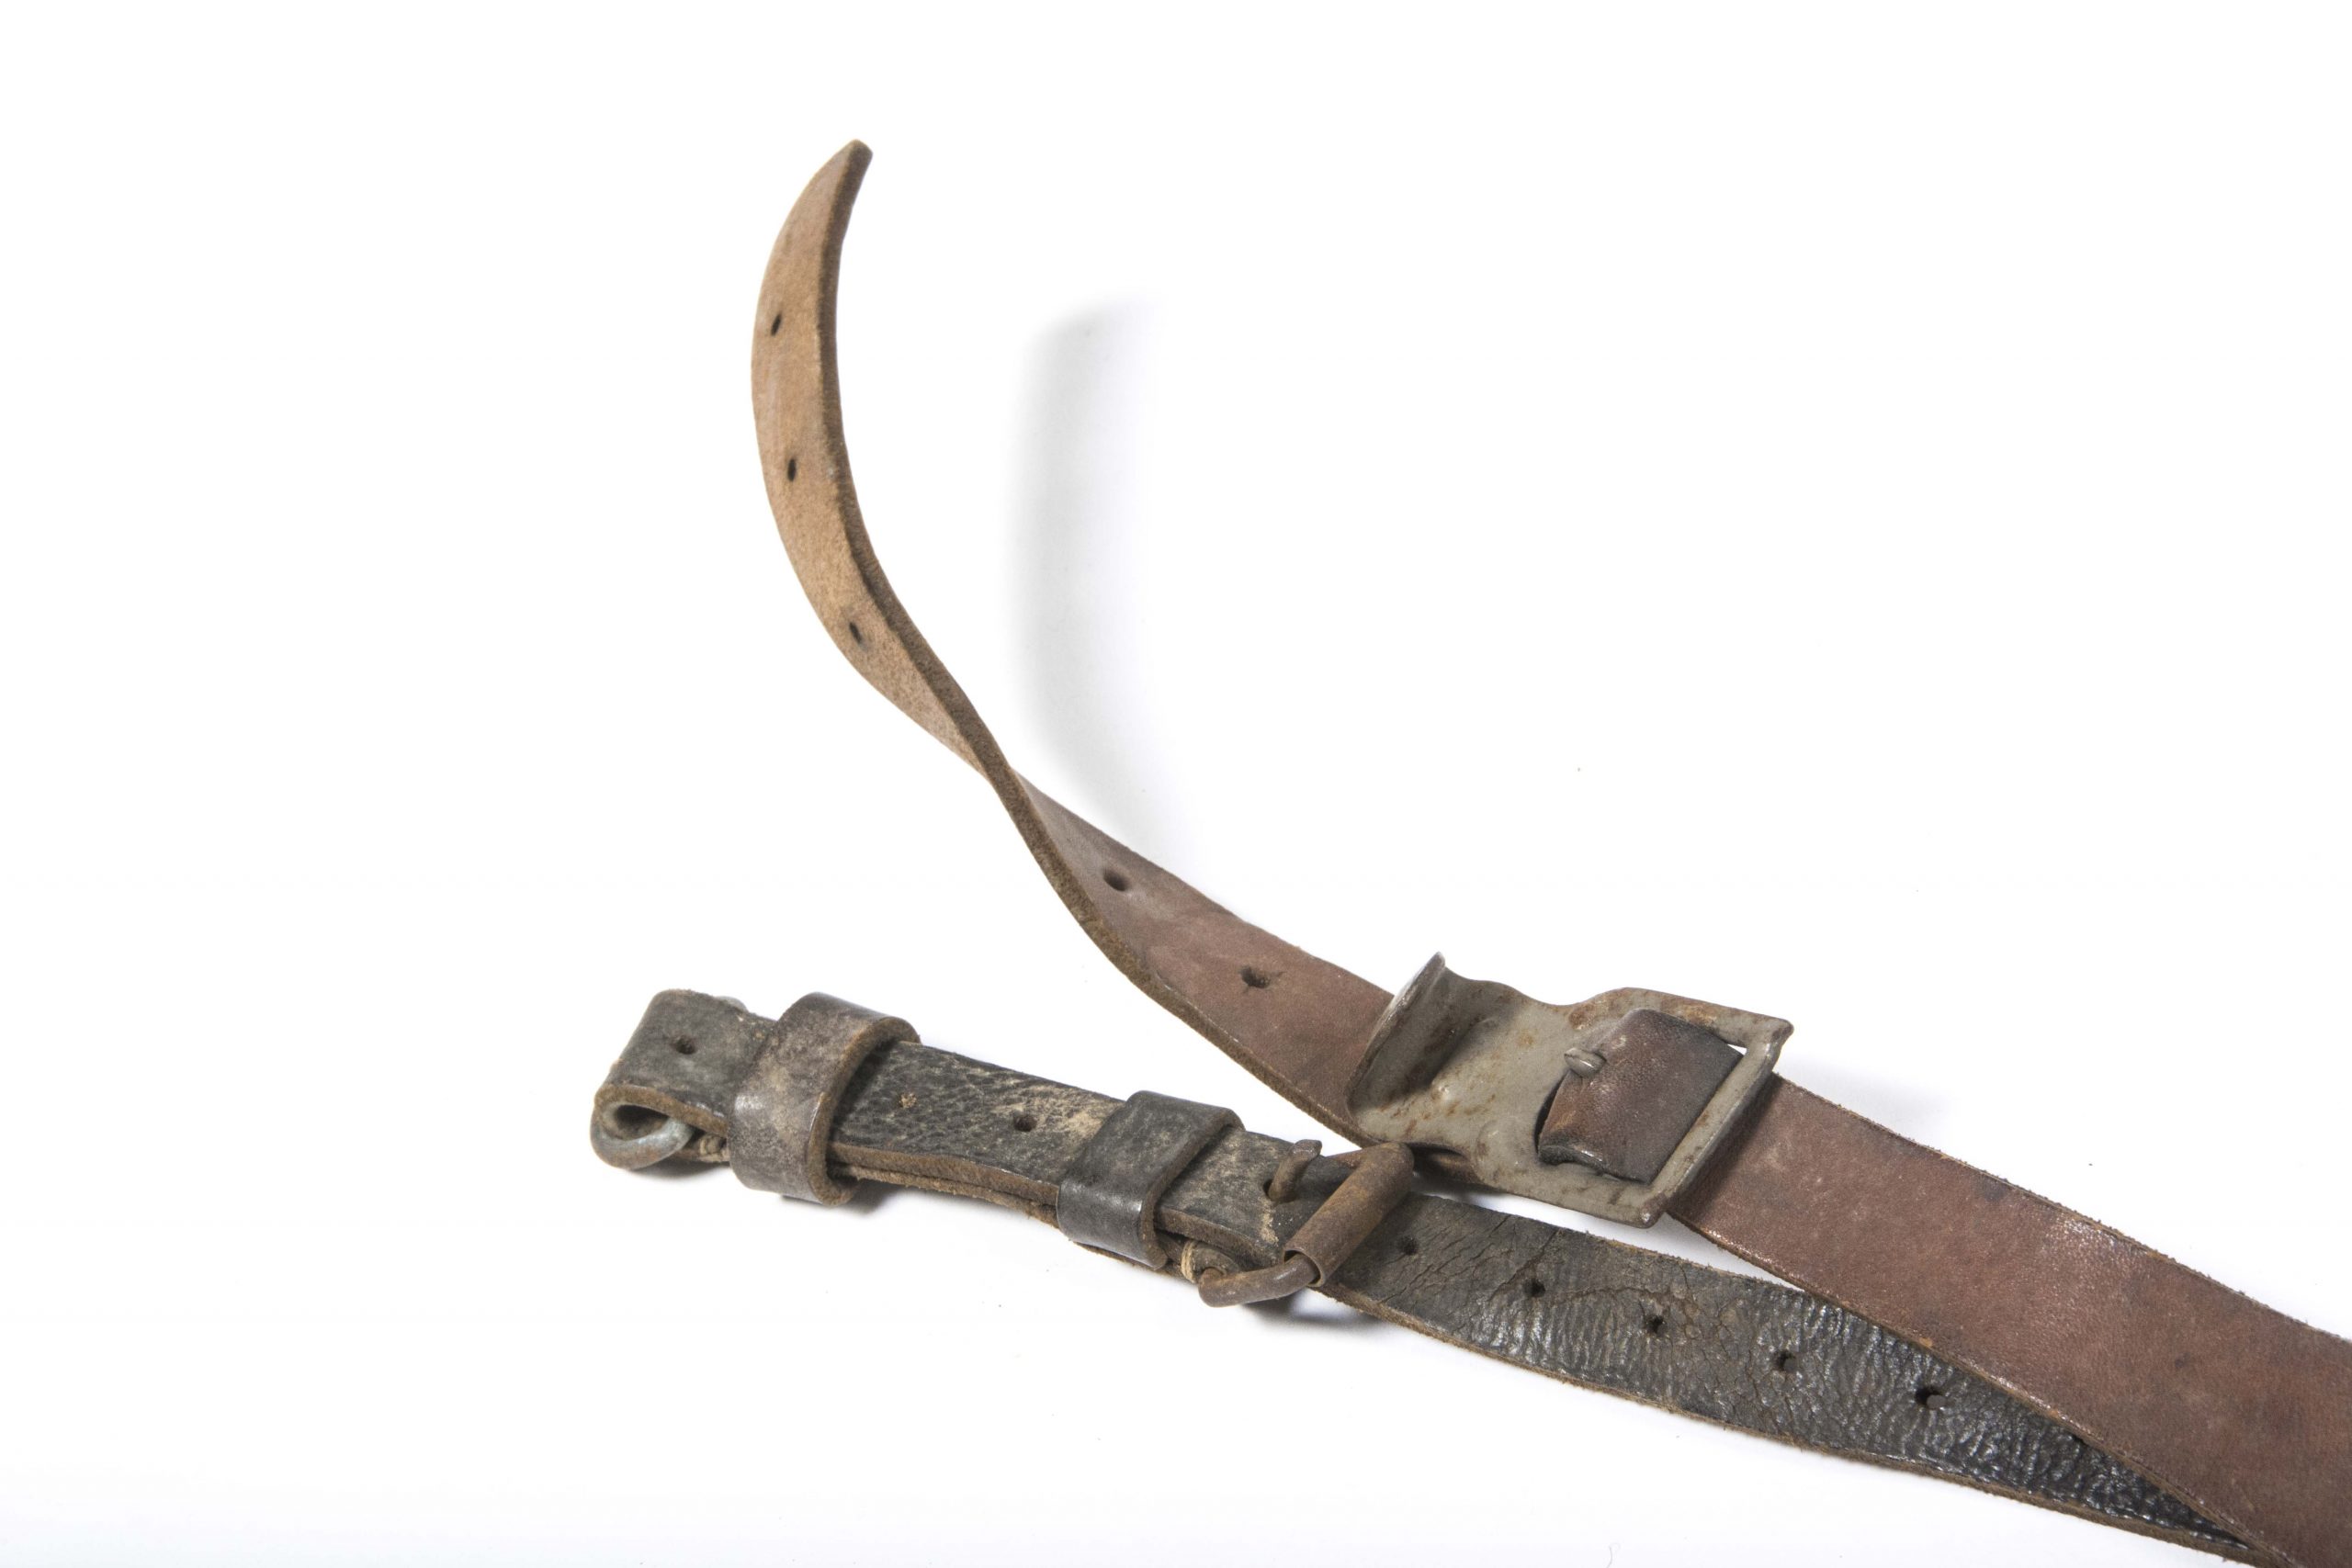 Prewar French Y-straps converted for the Wehrmacht – fjm44